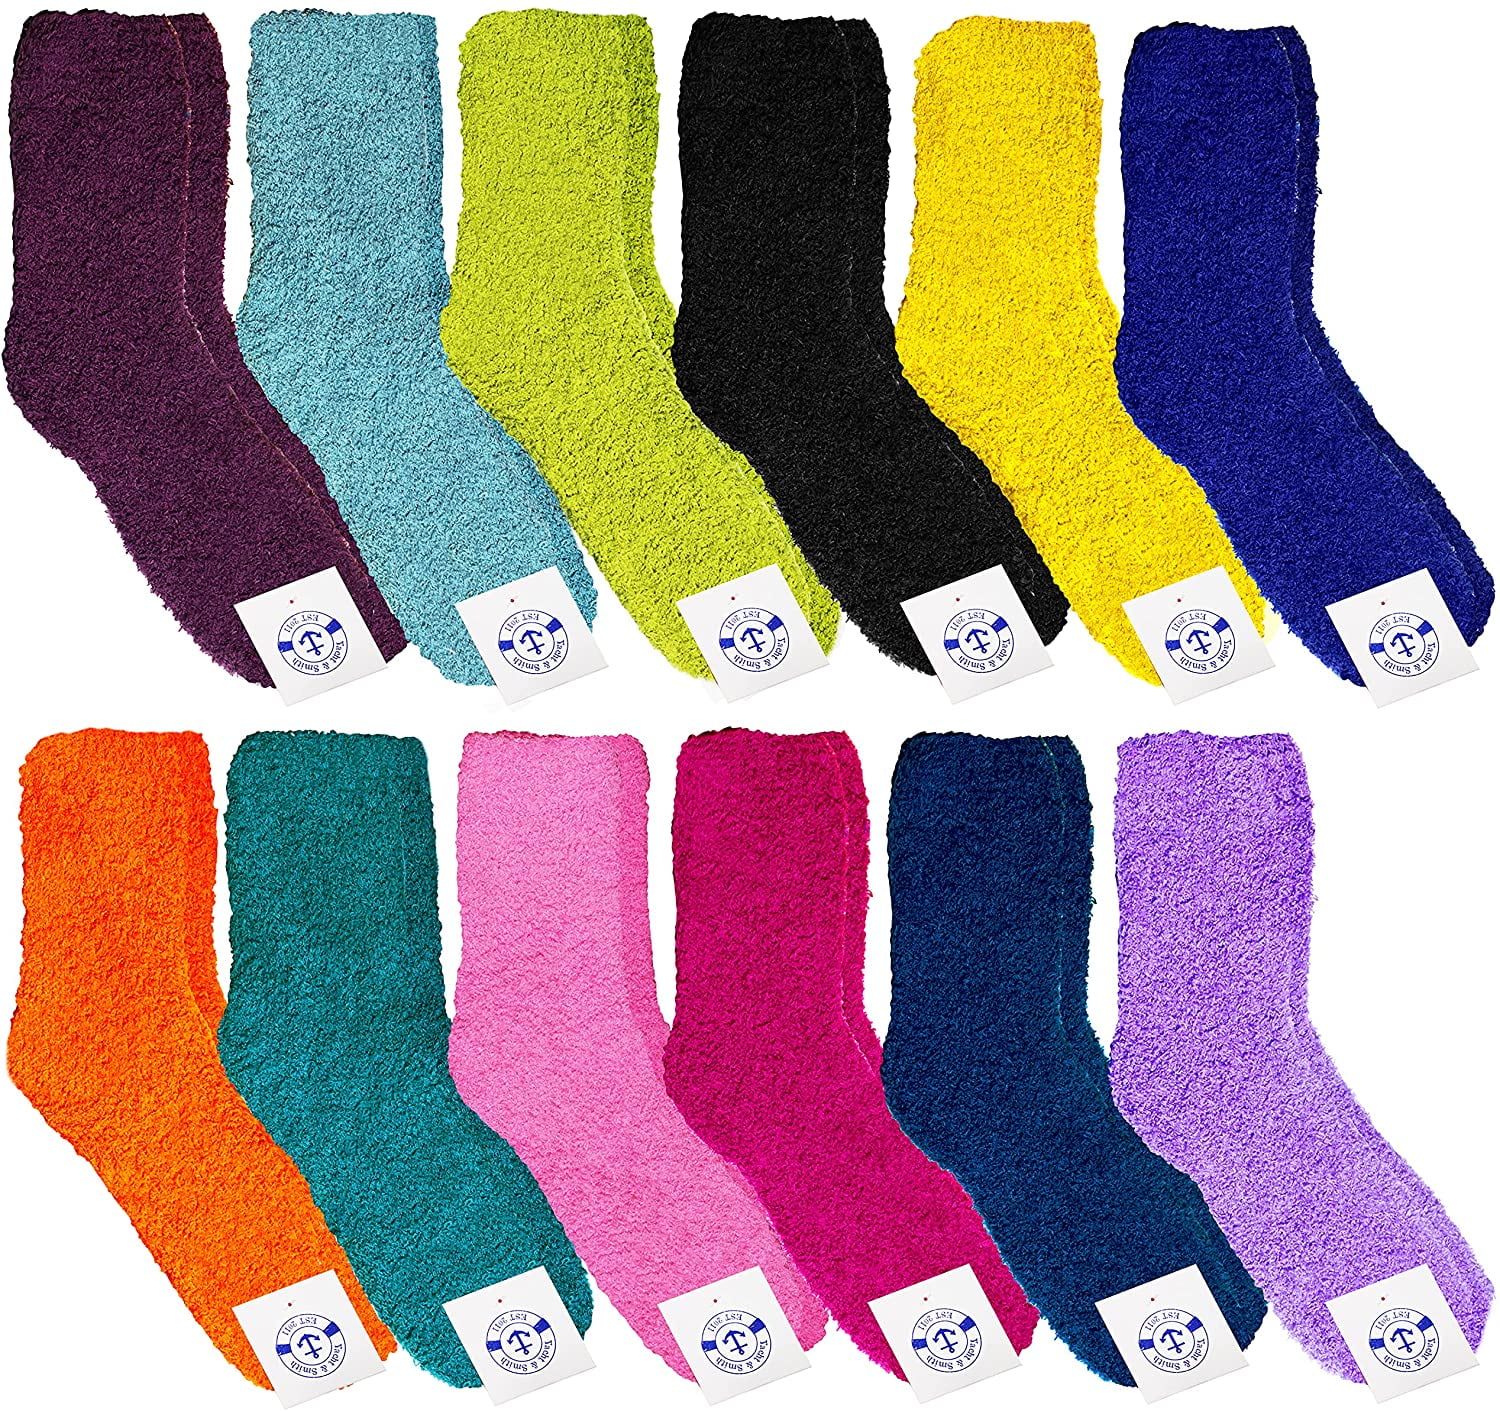 Wholesale Mens Cotton Ankle Socks - 3 Assorted Colors - 120 Pairs per Case 100 / Assorted